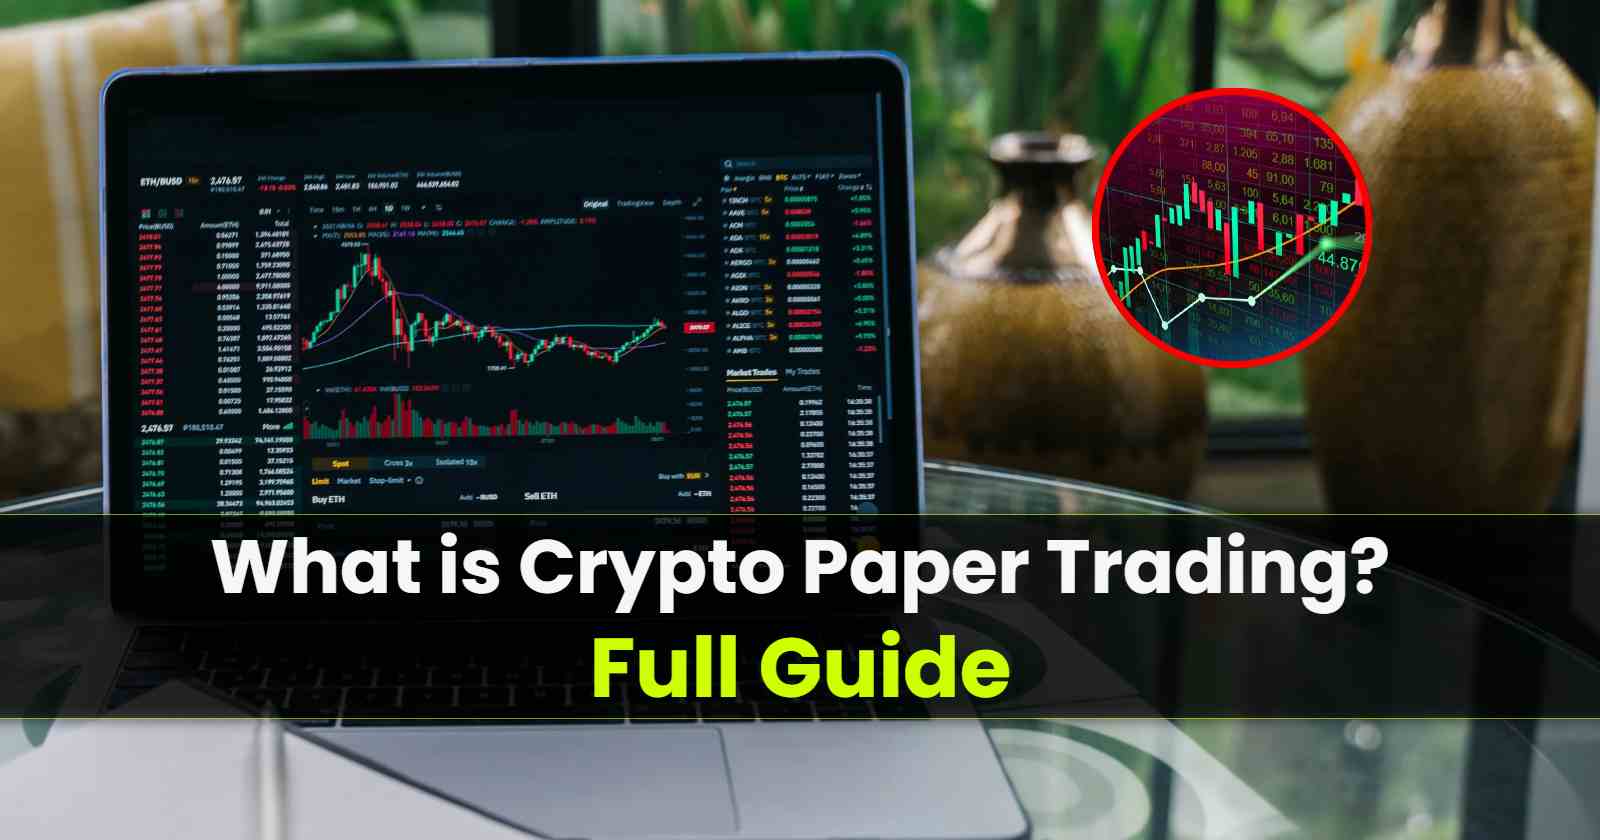 Crypto Paper Trading